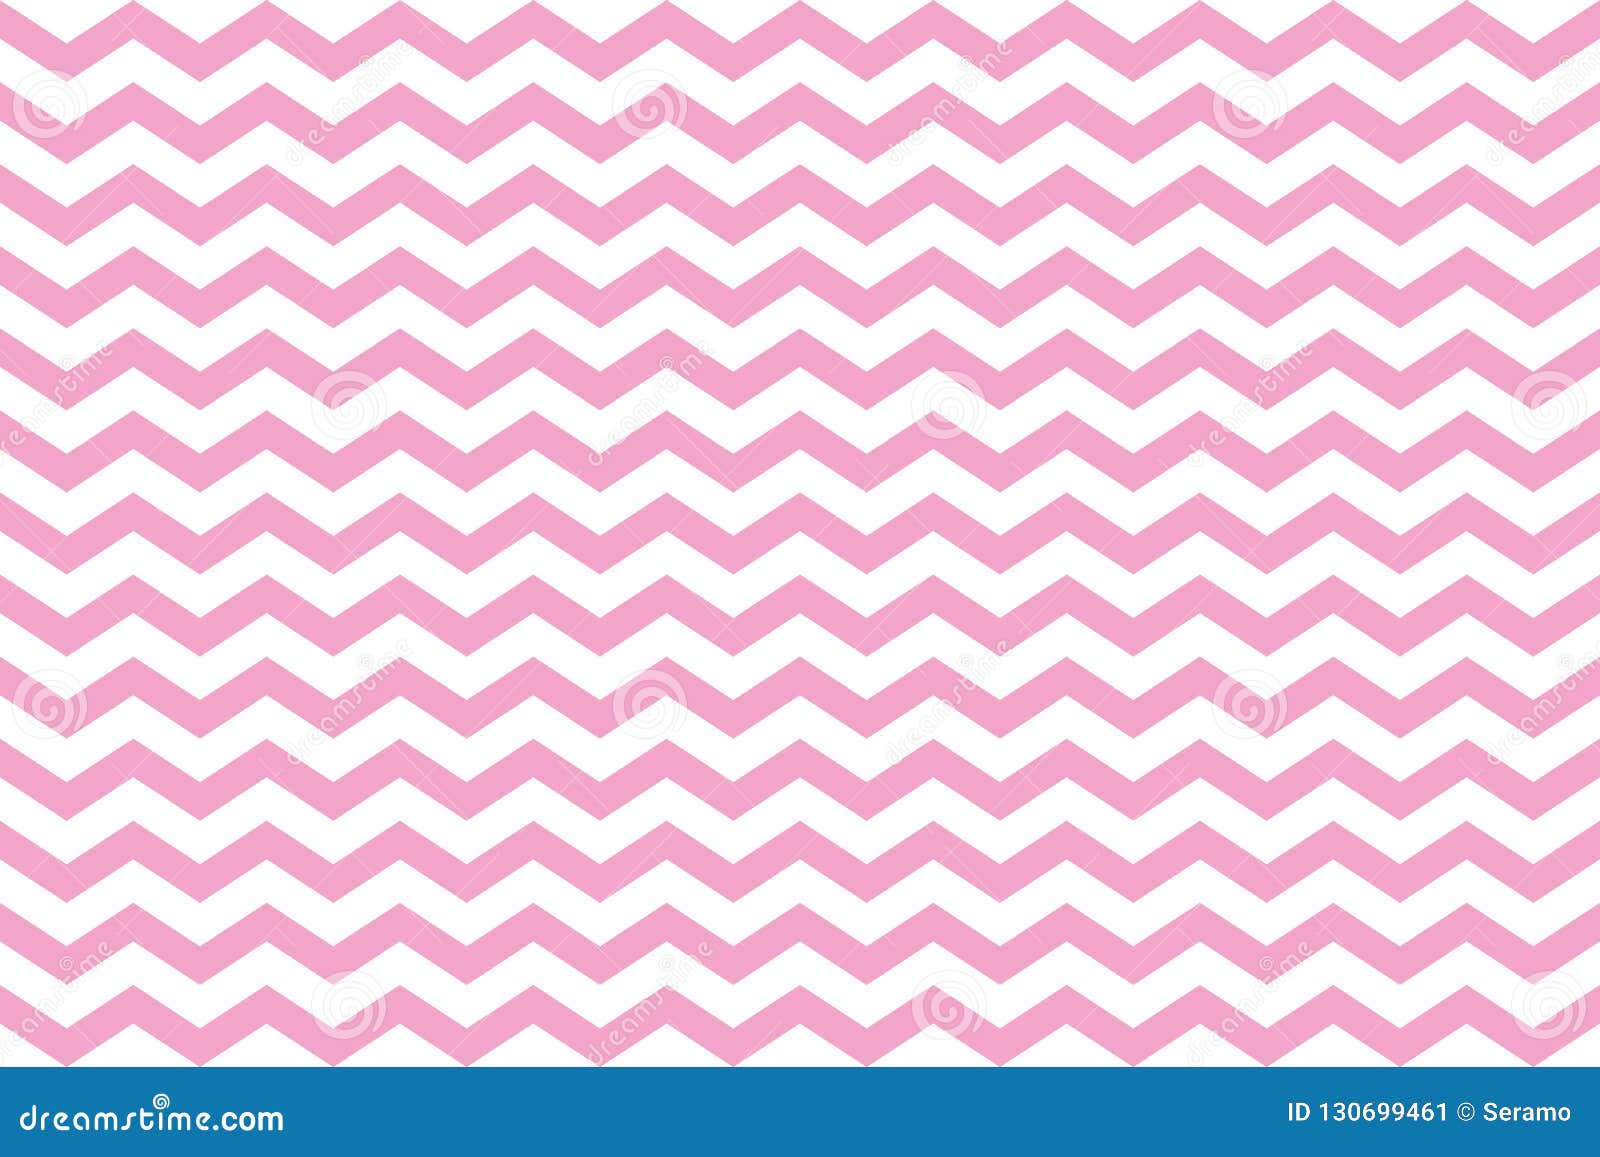 Zigzag stripes background stock vector. Illustration of graphic - 130699461